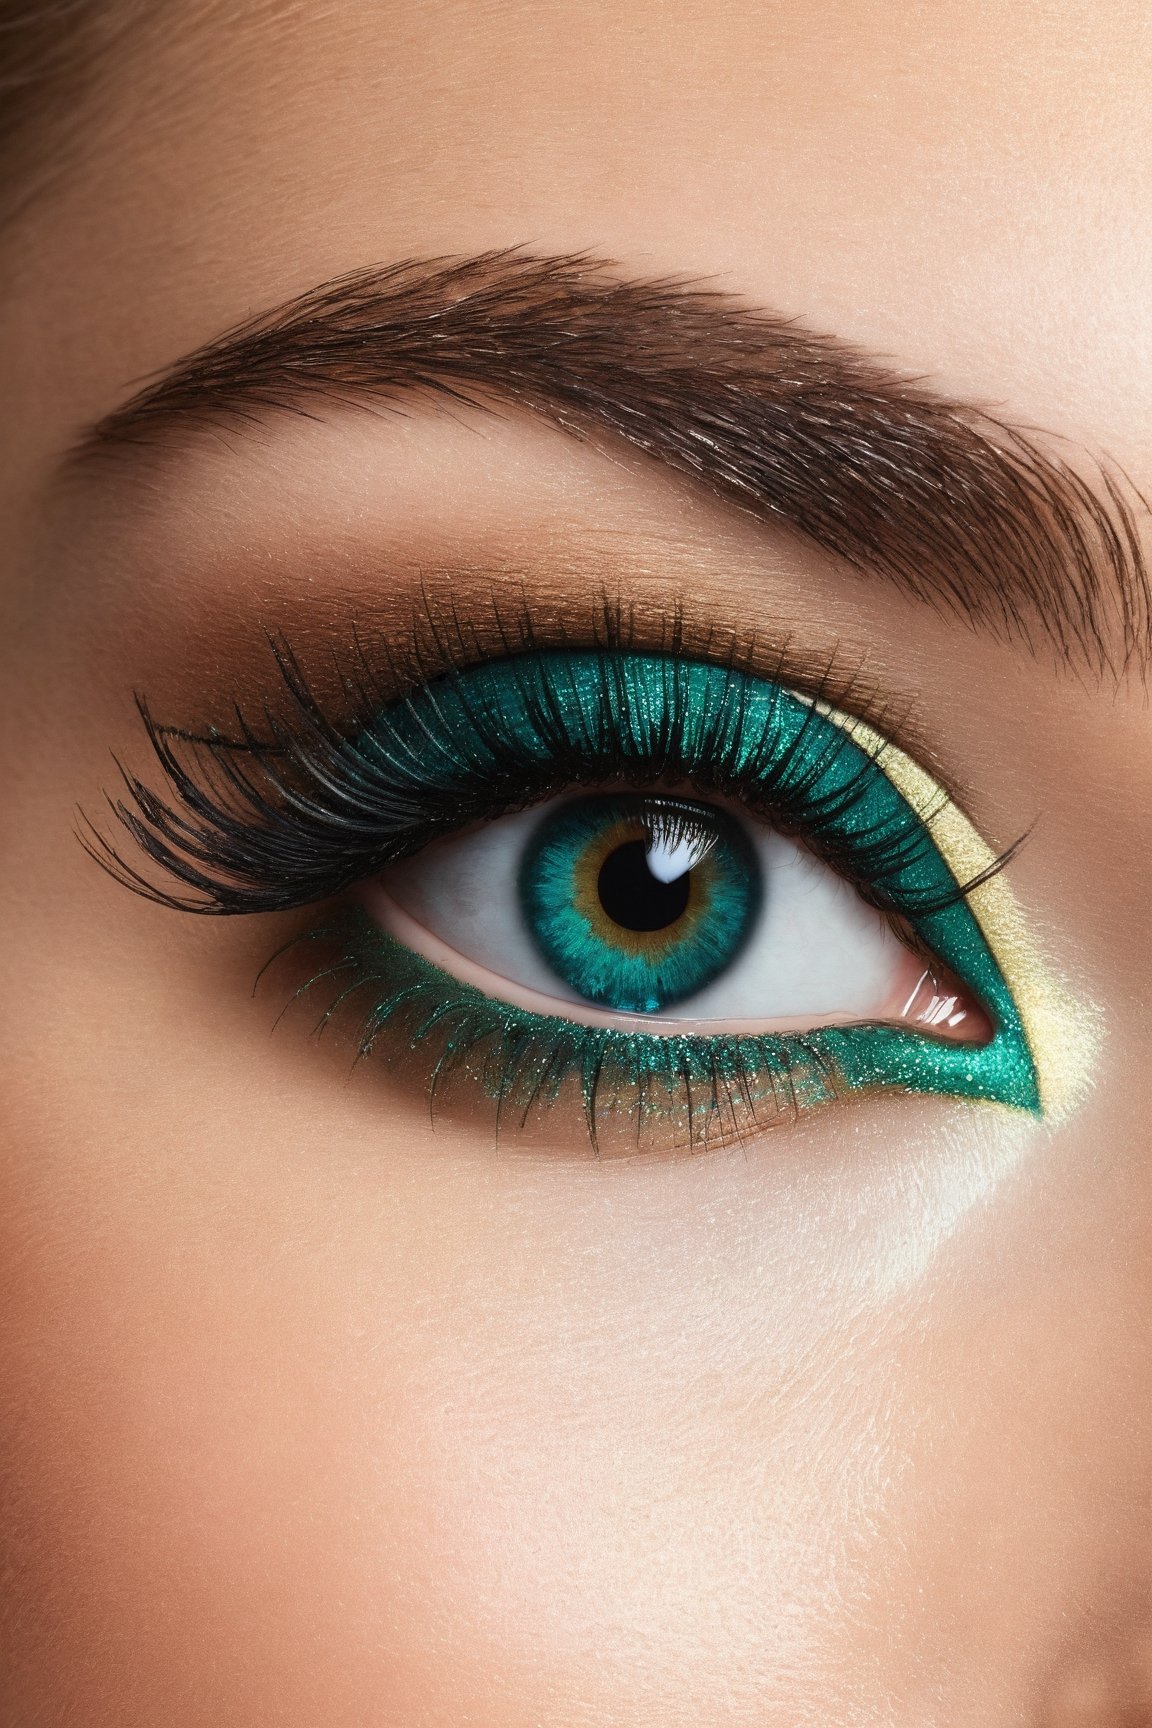 This eye resembles a vast sky at dusk, its deep shade of smaragda with a slight shimmer of emerald highlights makes the viewer immerse in it, as if in a sea of mysterious feelings and emotions. Luxurious eyelashes, like elegant peacock fans, affectionately frame this look, adding mystery and majesty. Every moment in this eye is like a Renaissance painting, where every brush stroke brings new delight and admiration